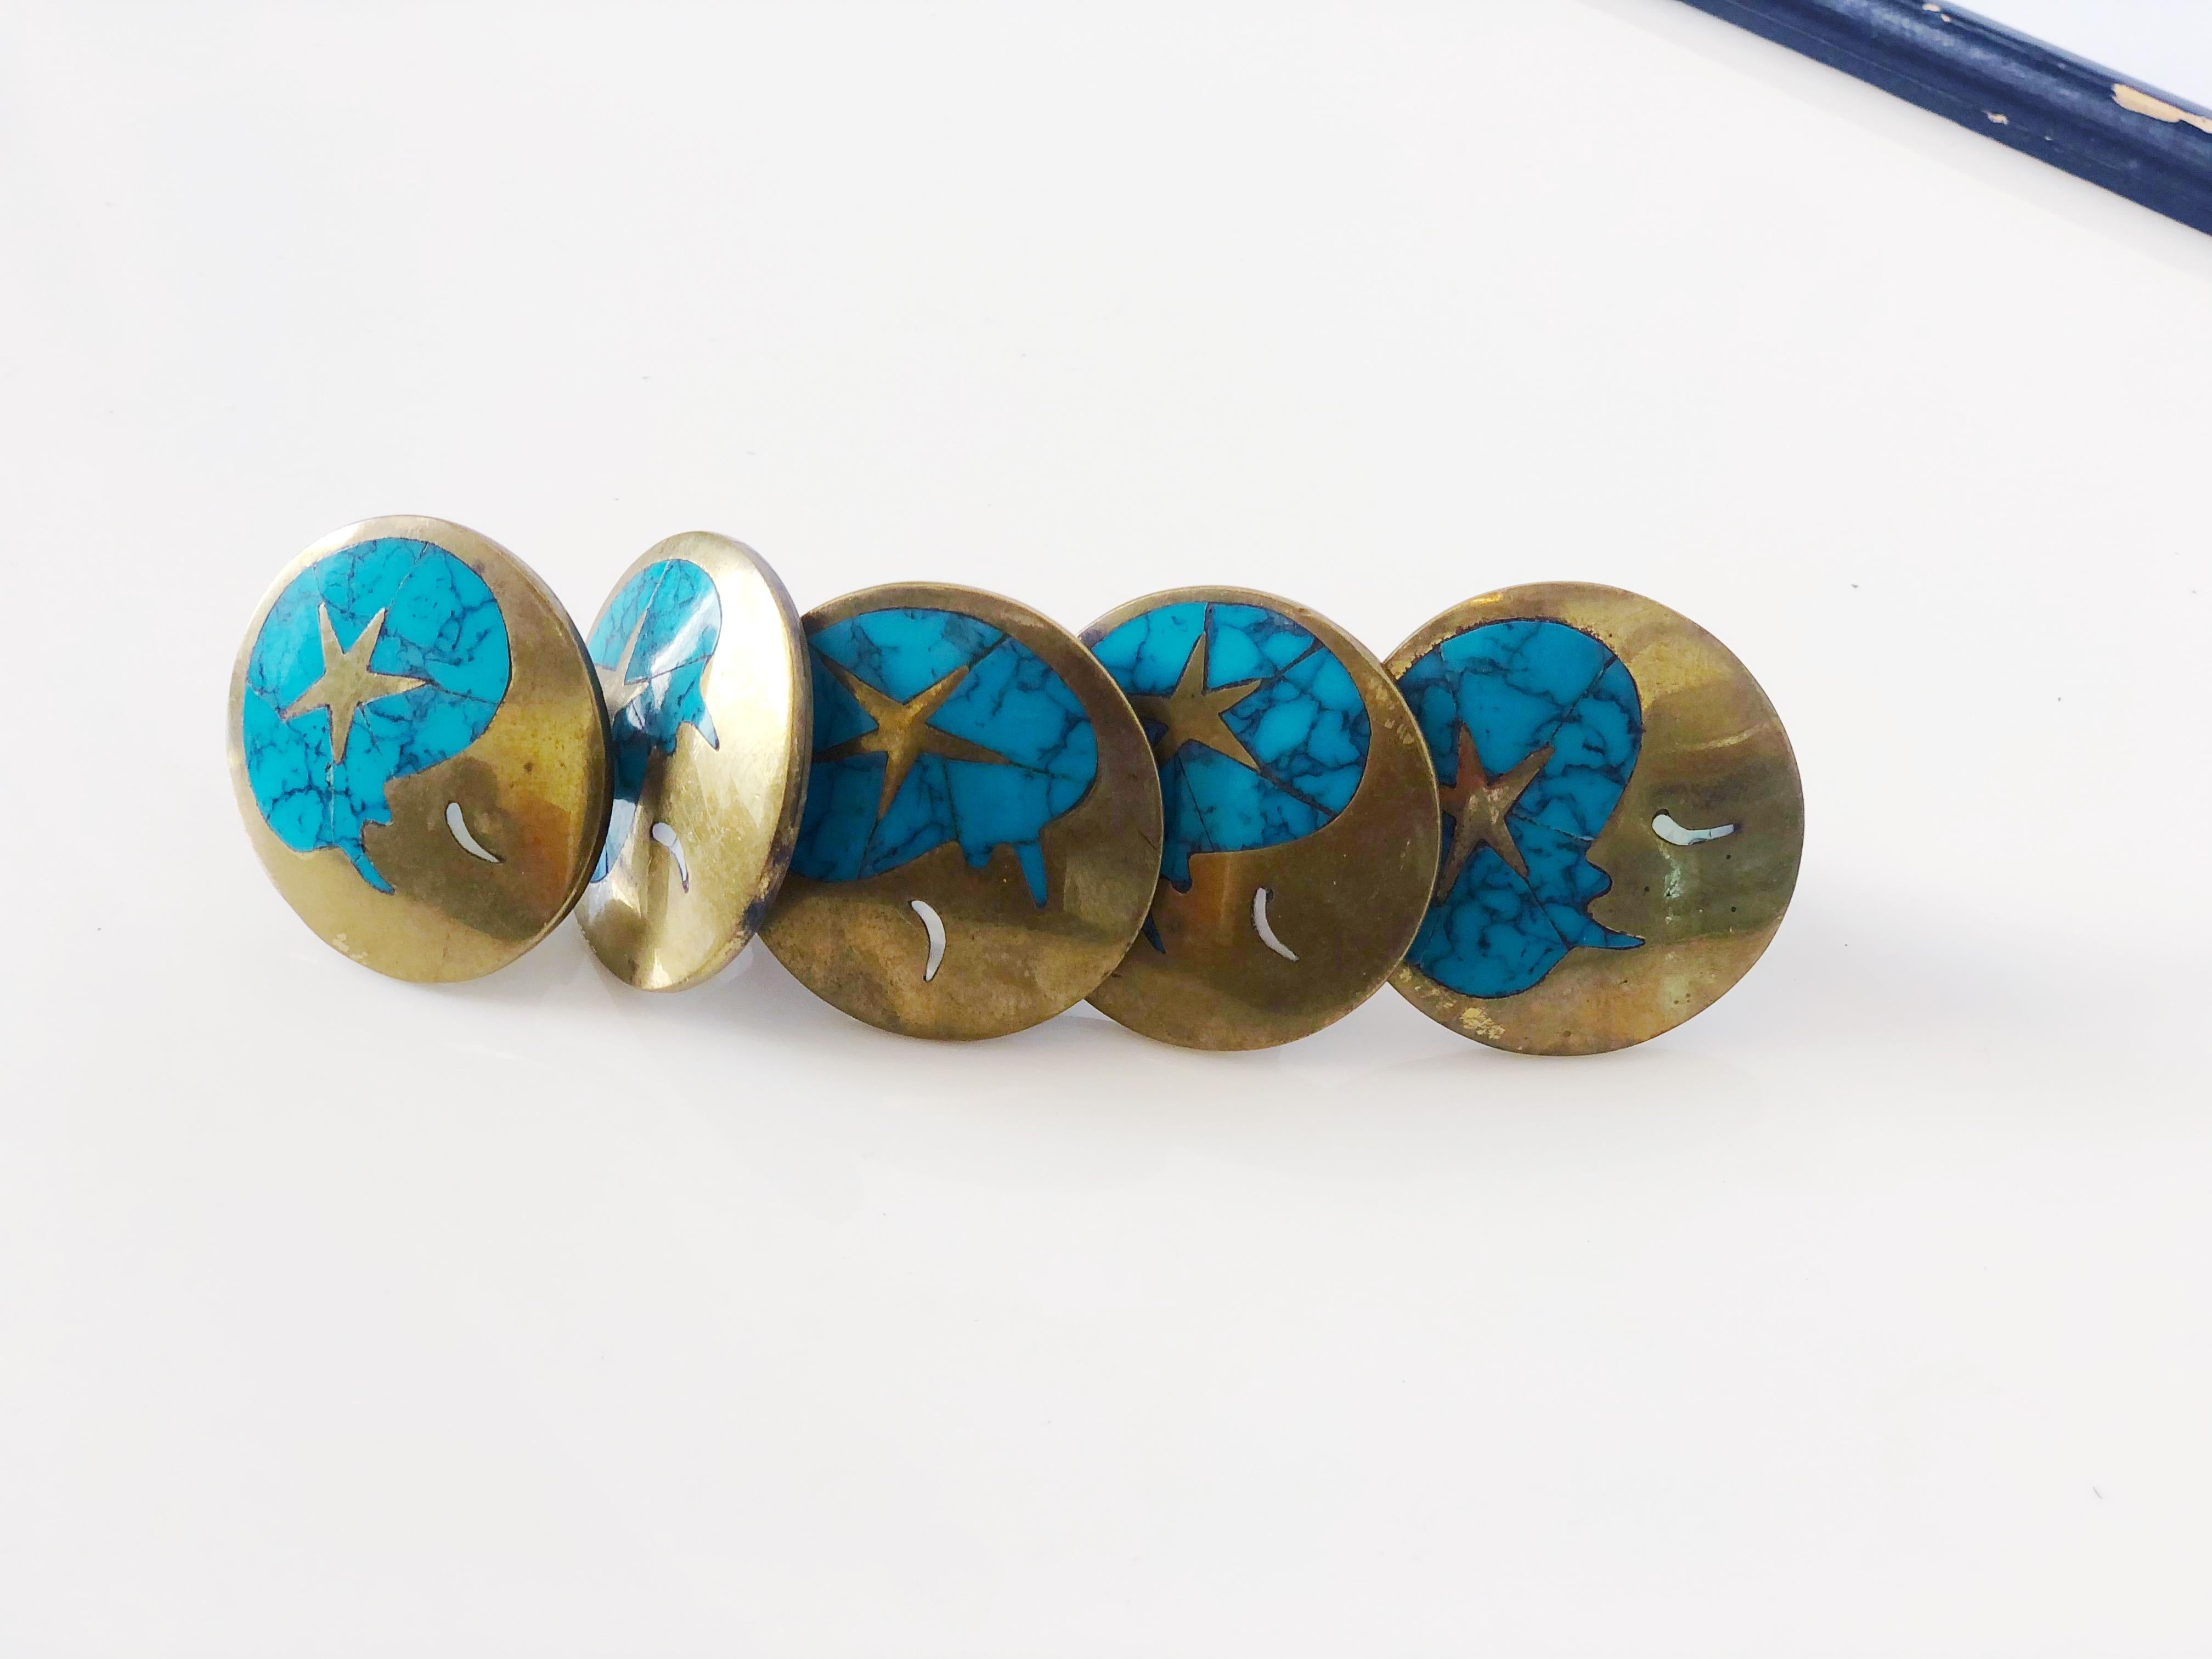 These vintage blue turquoise and brass drawer pulls by Los Castillos are in overall great condition. Mystical star and moon motif.
Taxco, Mexico. circa 1960s.
Items sold separately.
Dimensions:
1.5